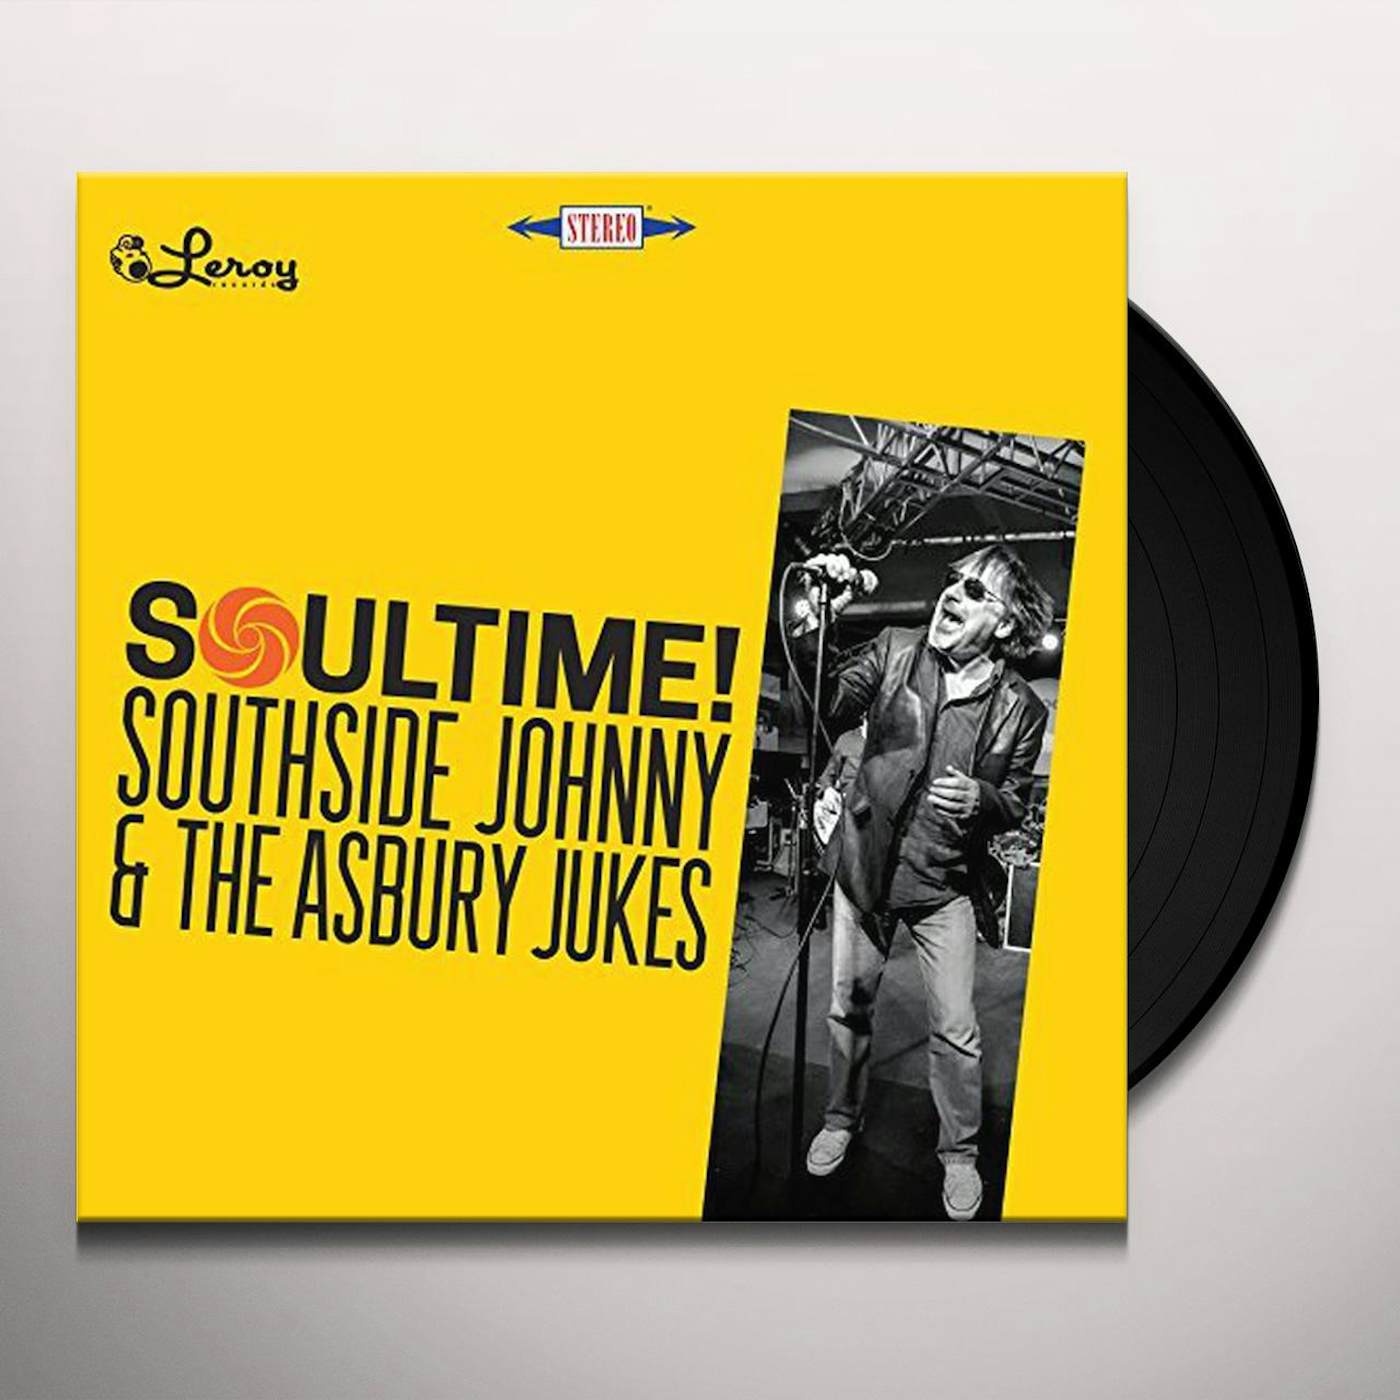 Southside Johnny And The Asbury Jukes SOULTIME! Vinyl Record